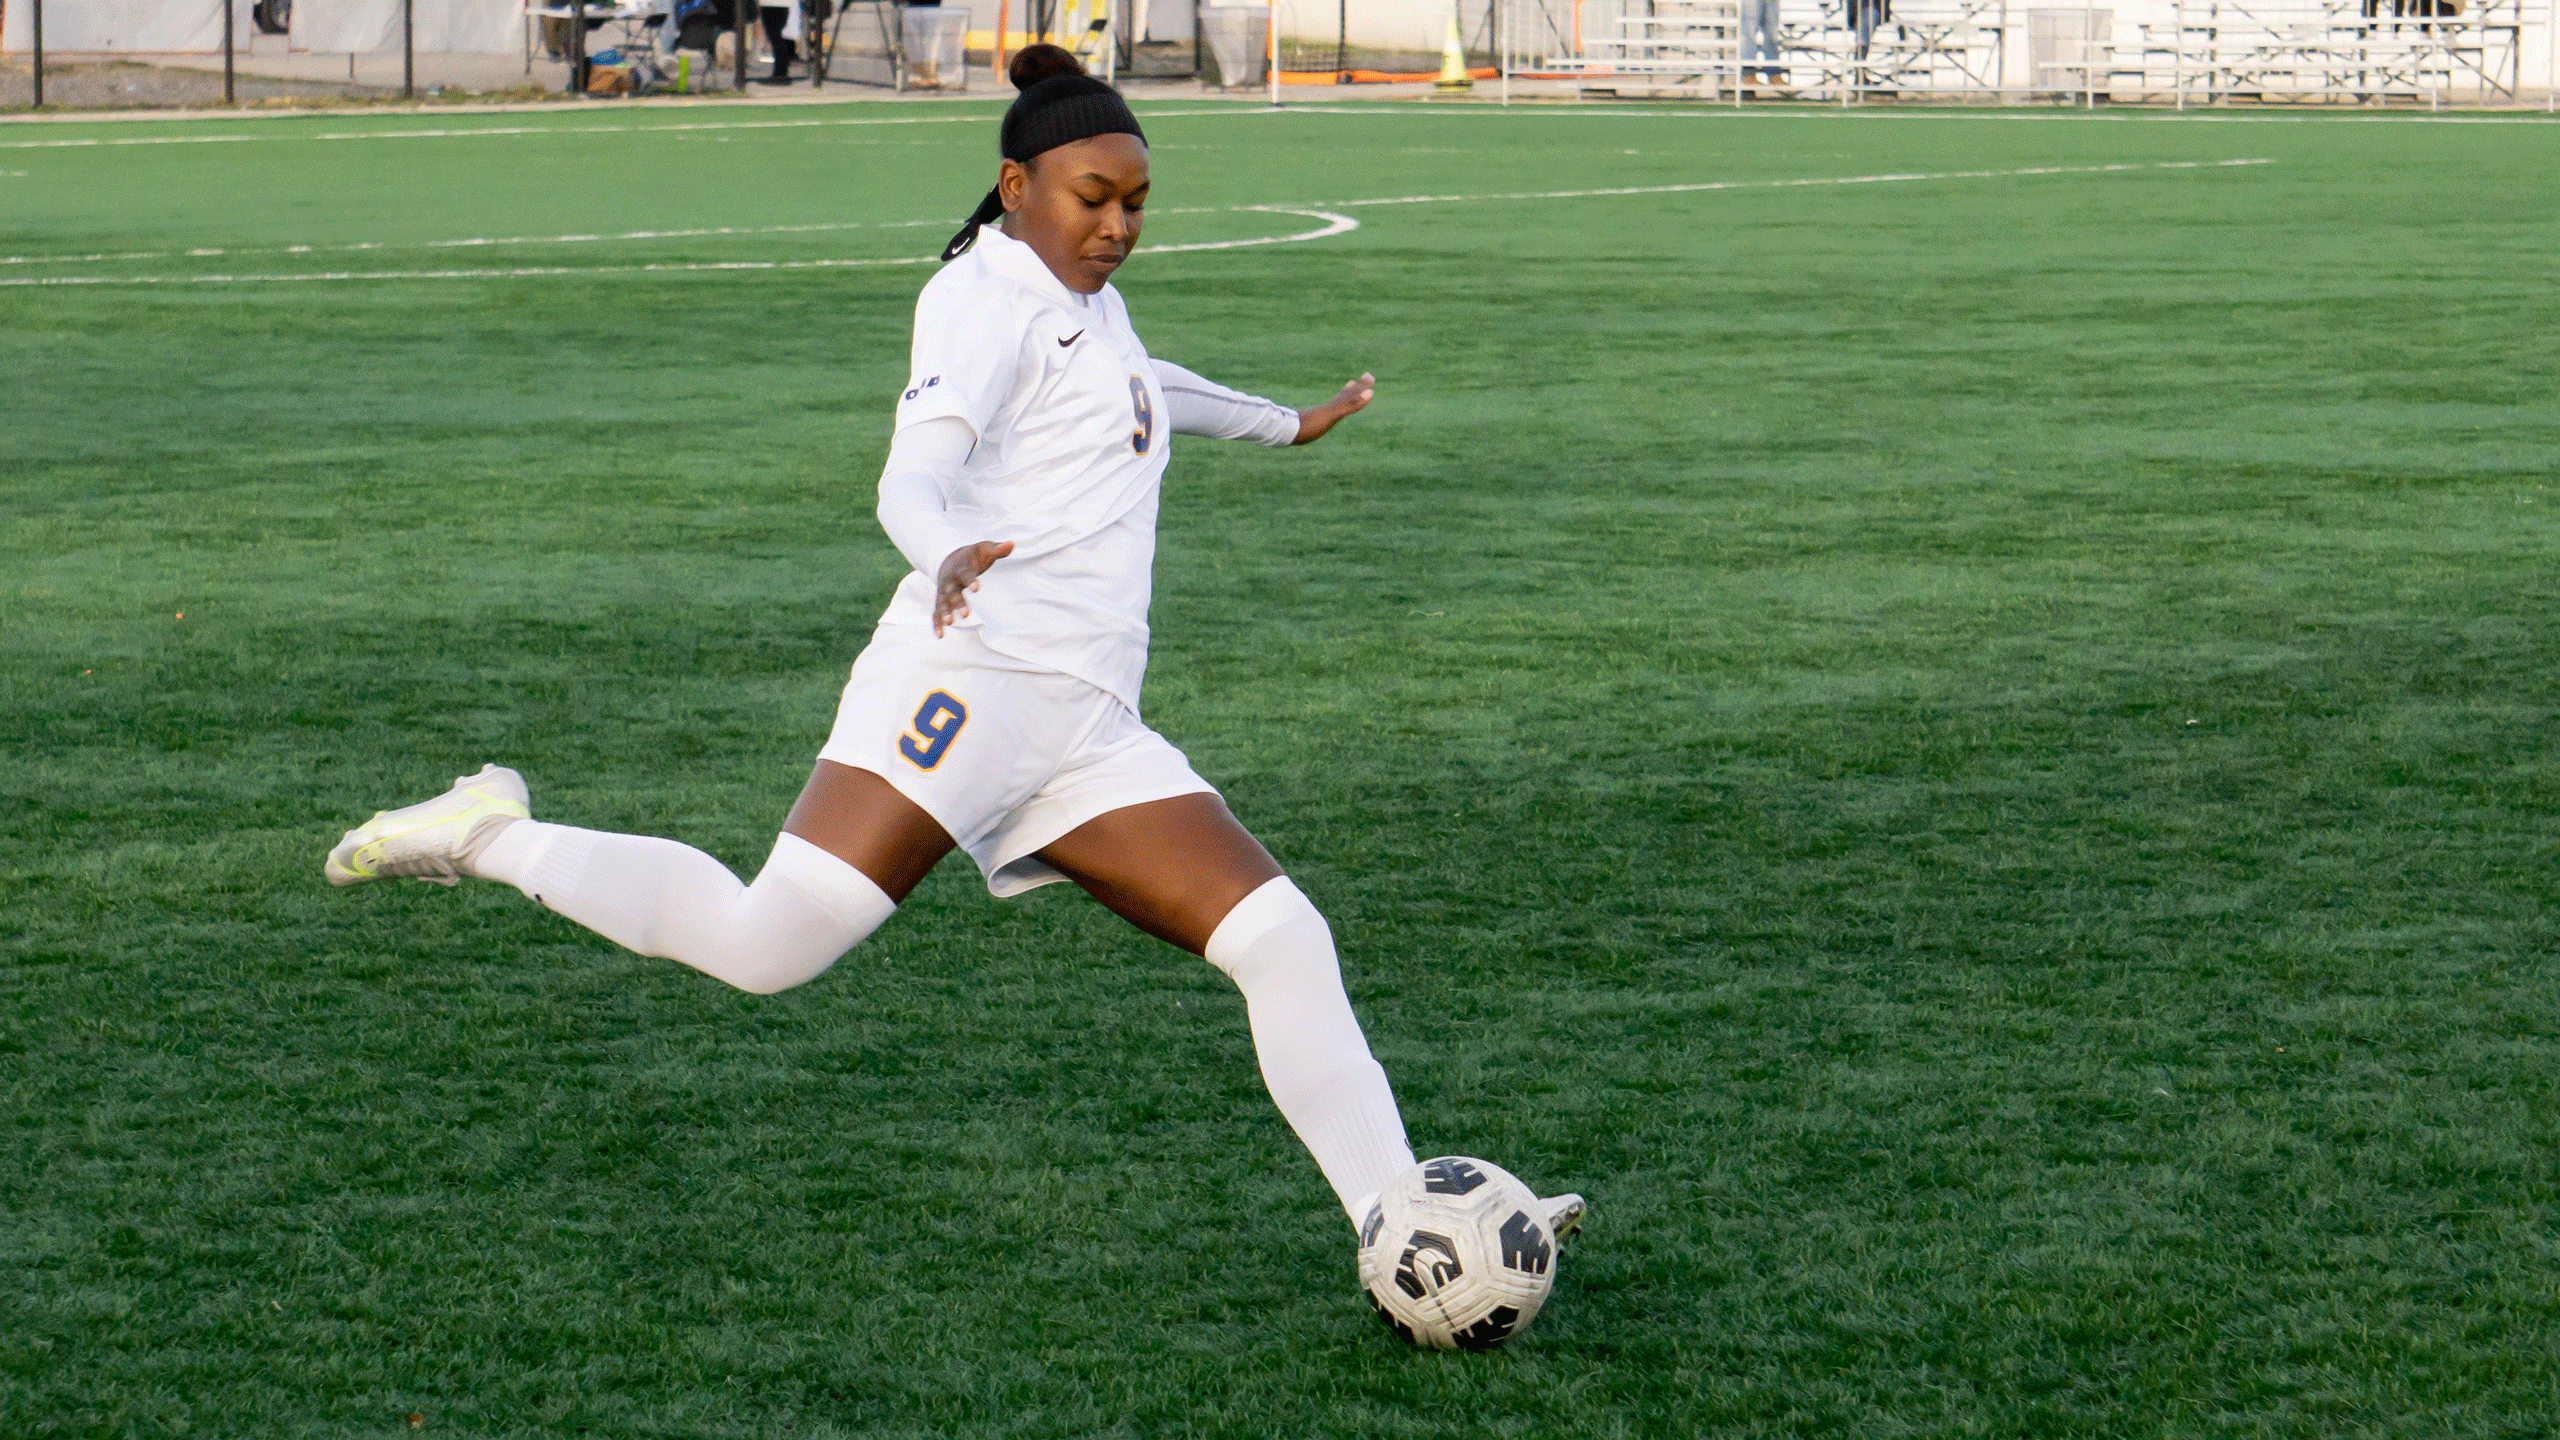 A Rams women's soccer player in a white jersey attacks the ball